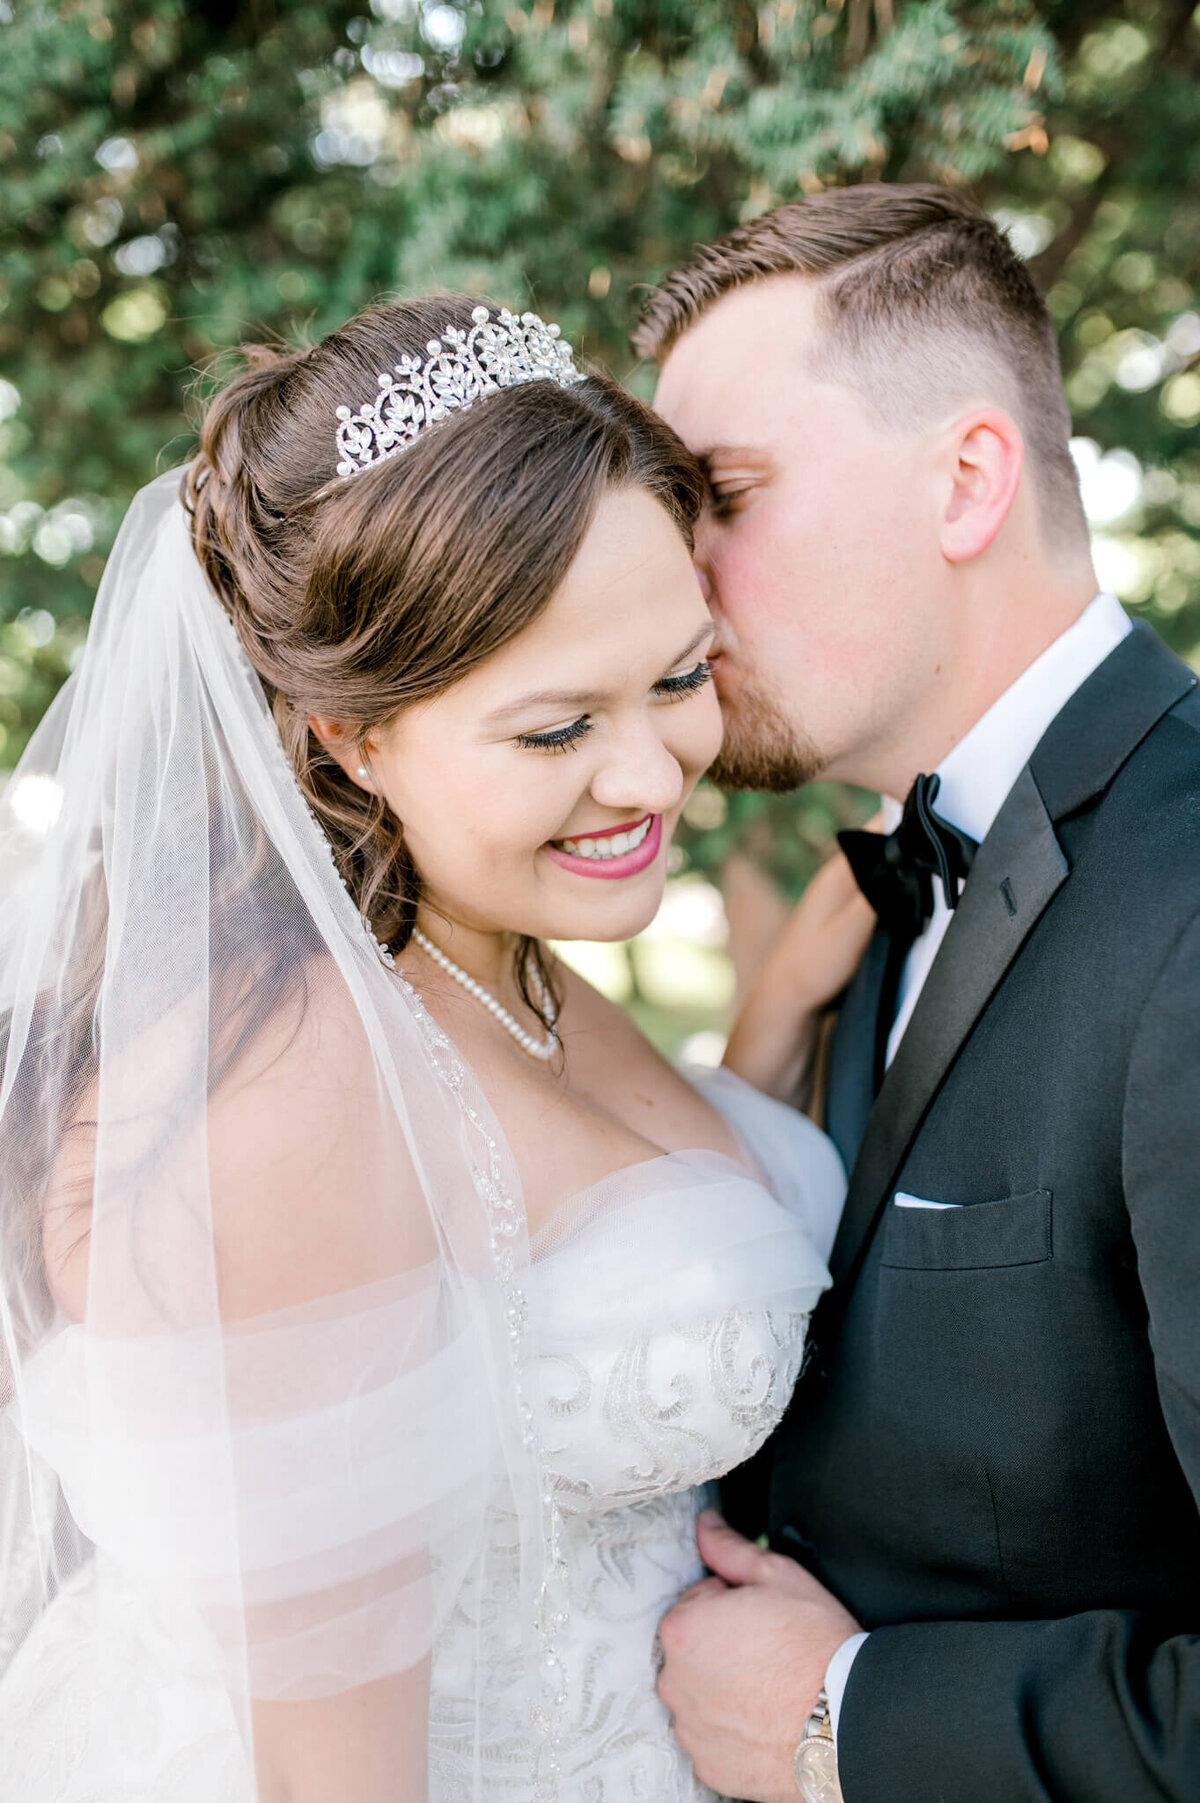 Groom kisses bride on the head and bride smiles with joy